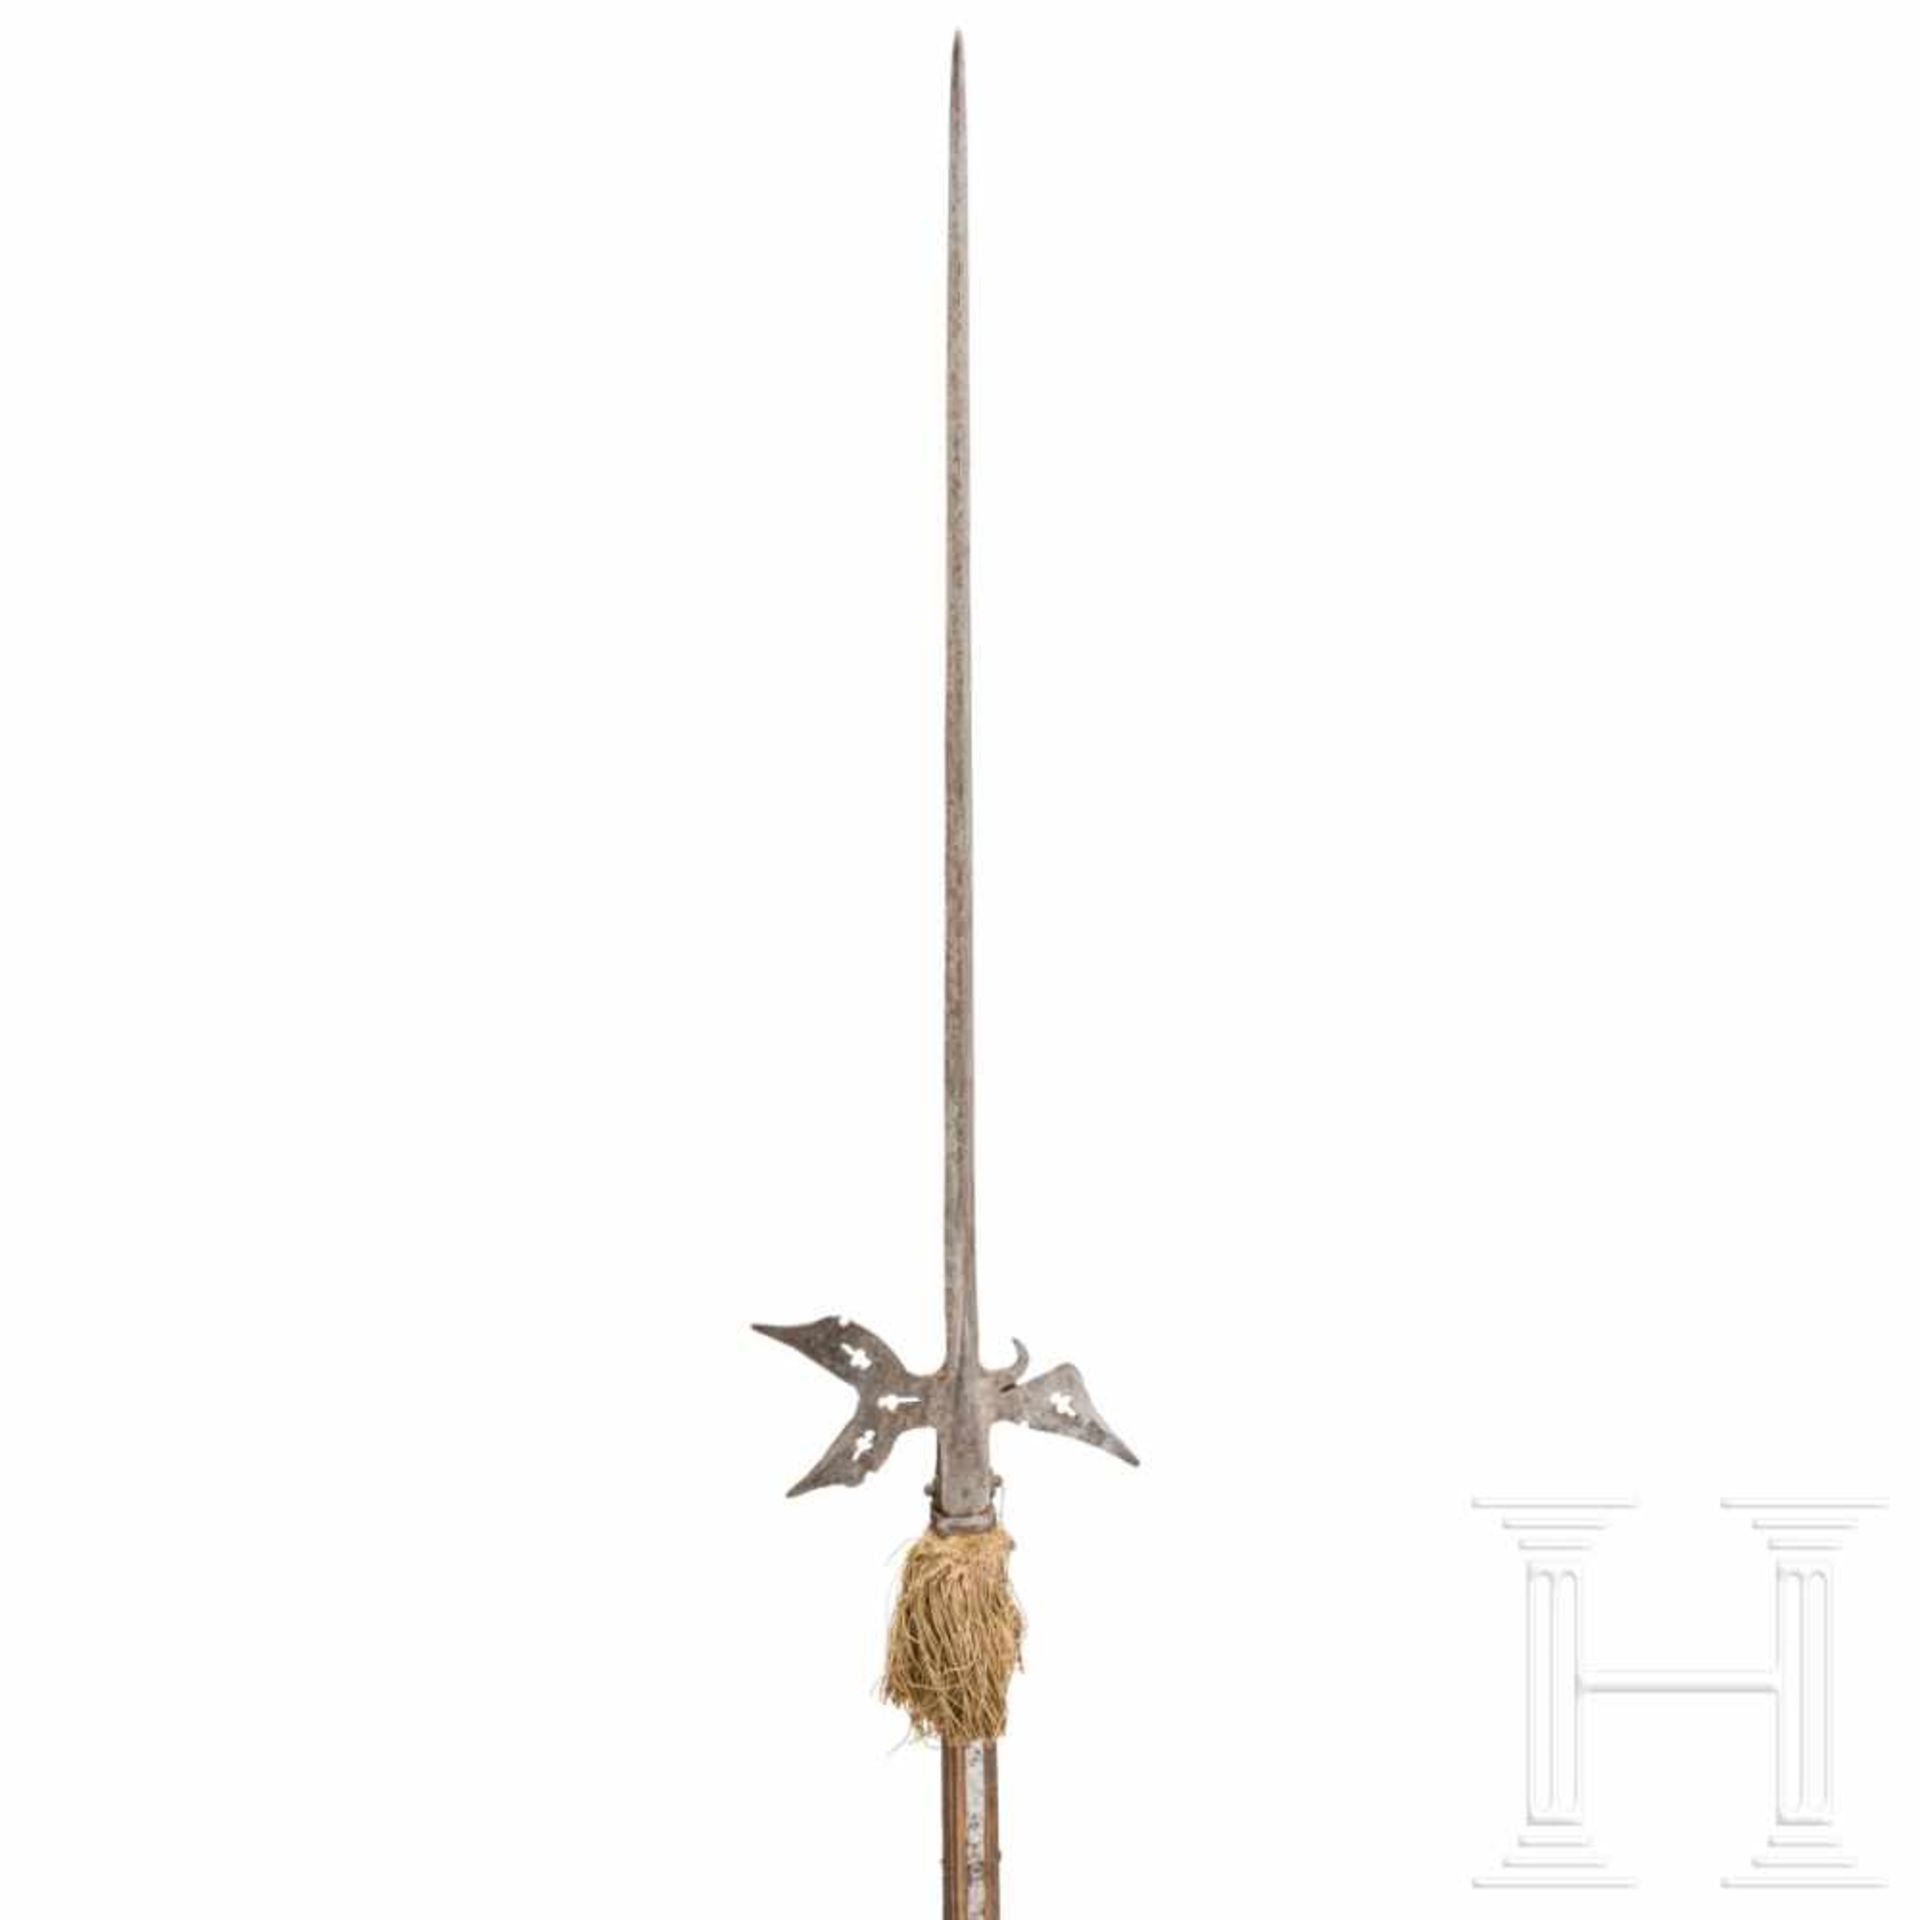 An Austrian halberd, Styria (?), late-16th centuryParticularly long, diamond-shaped stabbing top